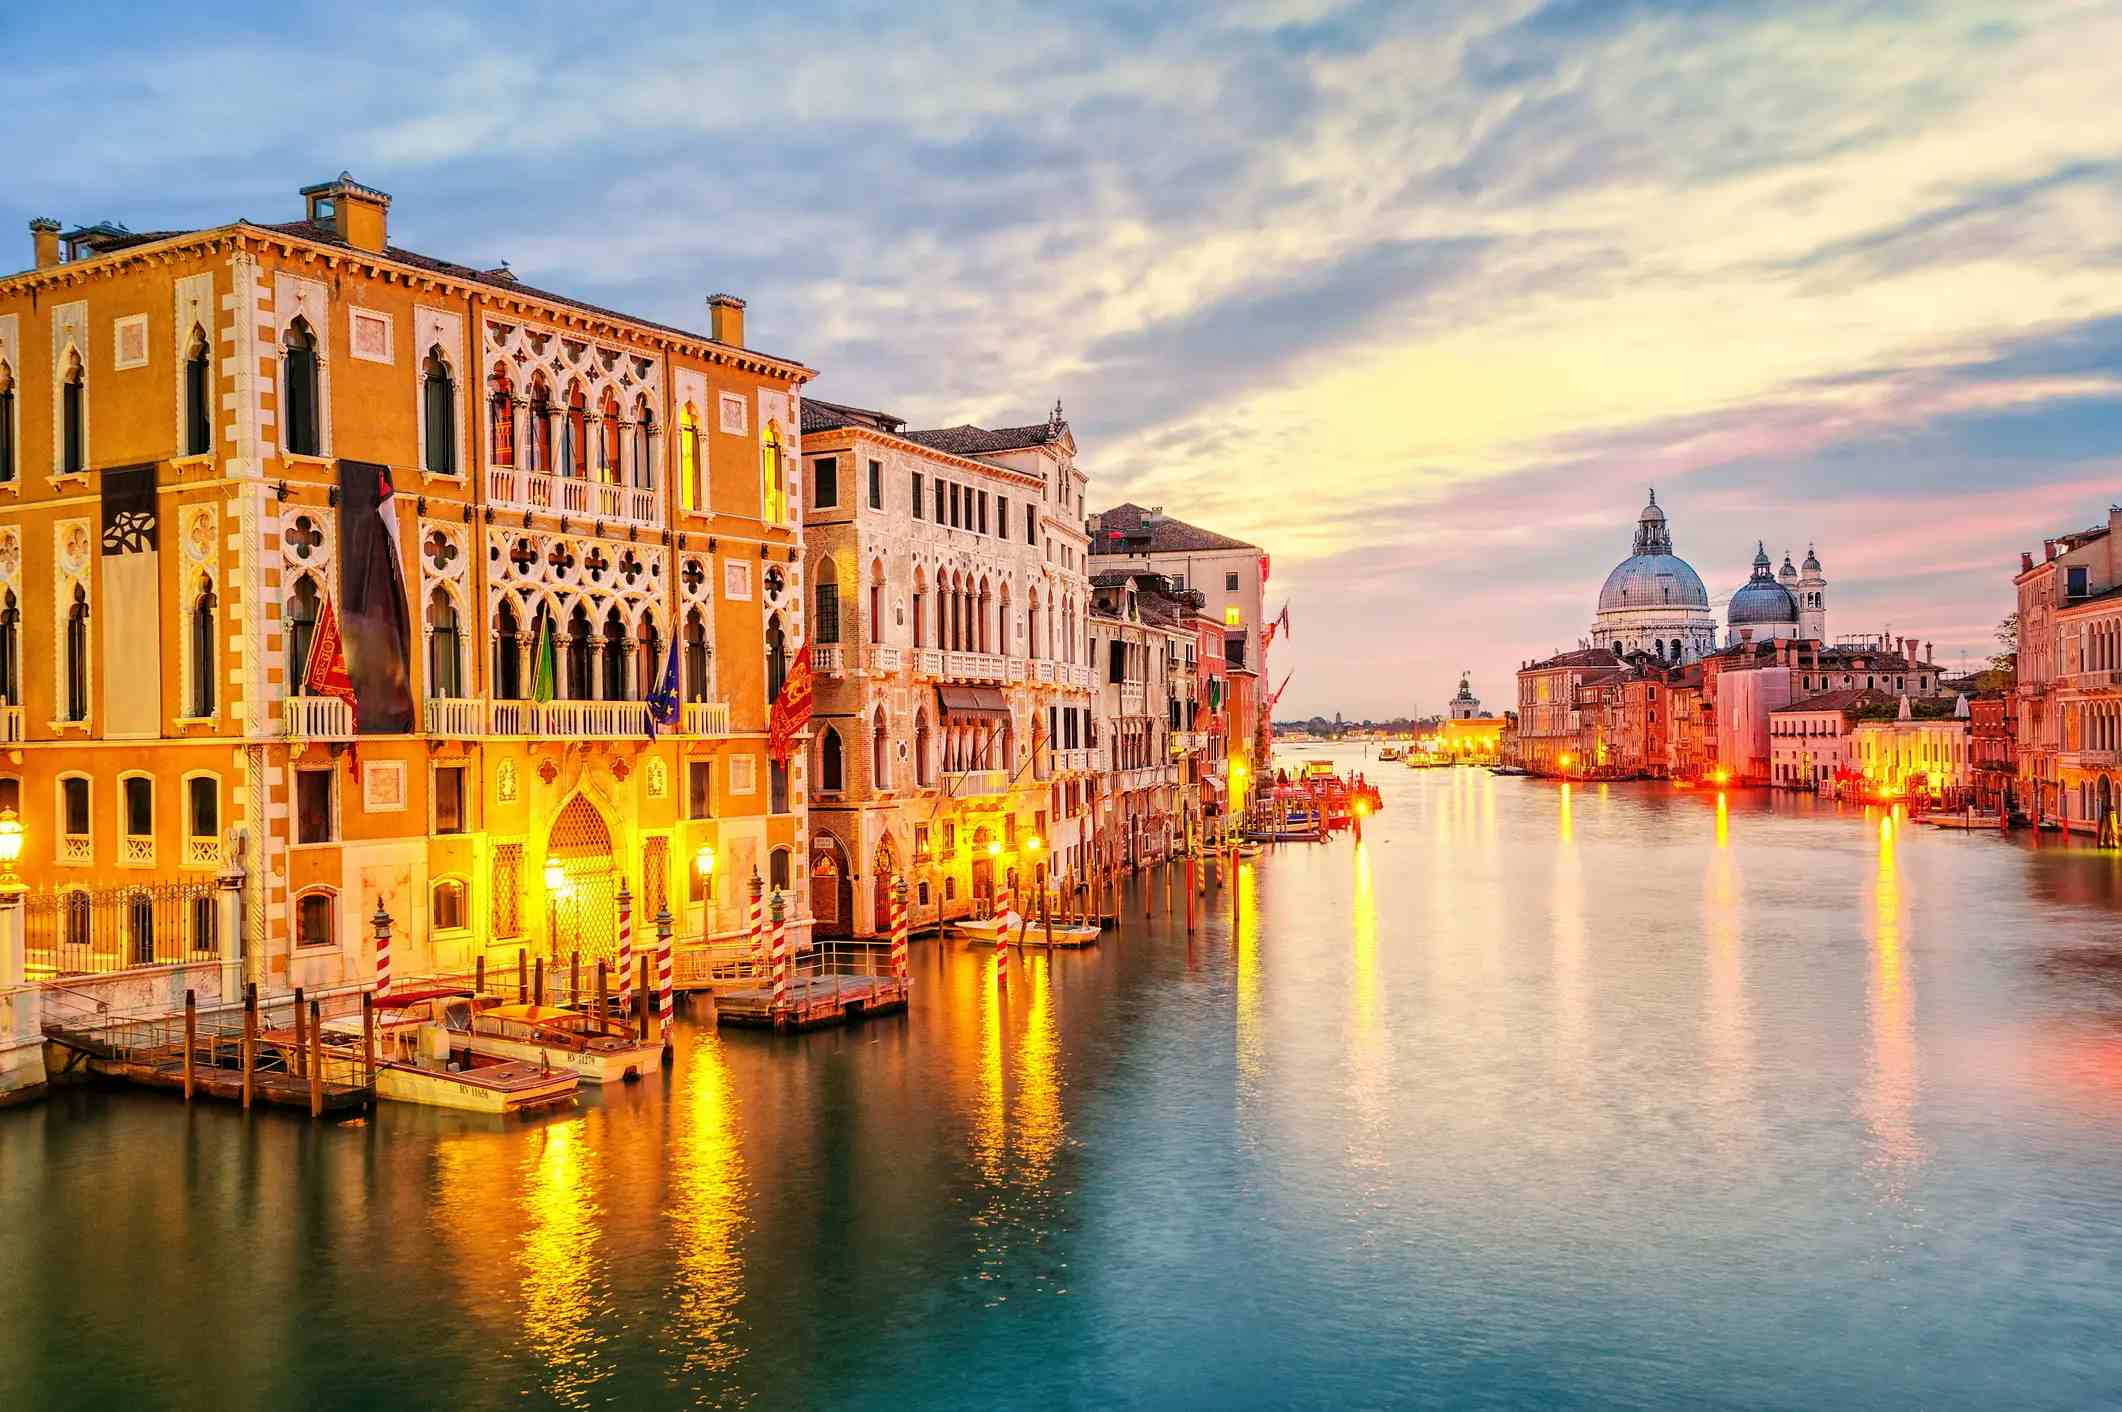 Canal Grande image